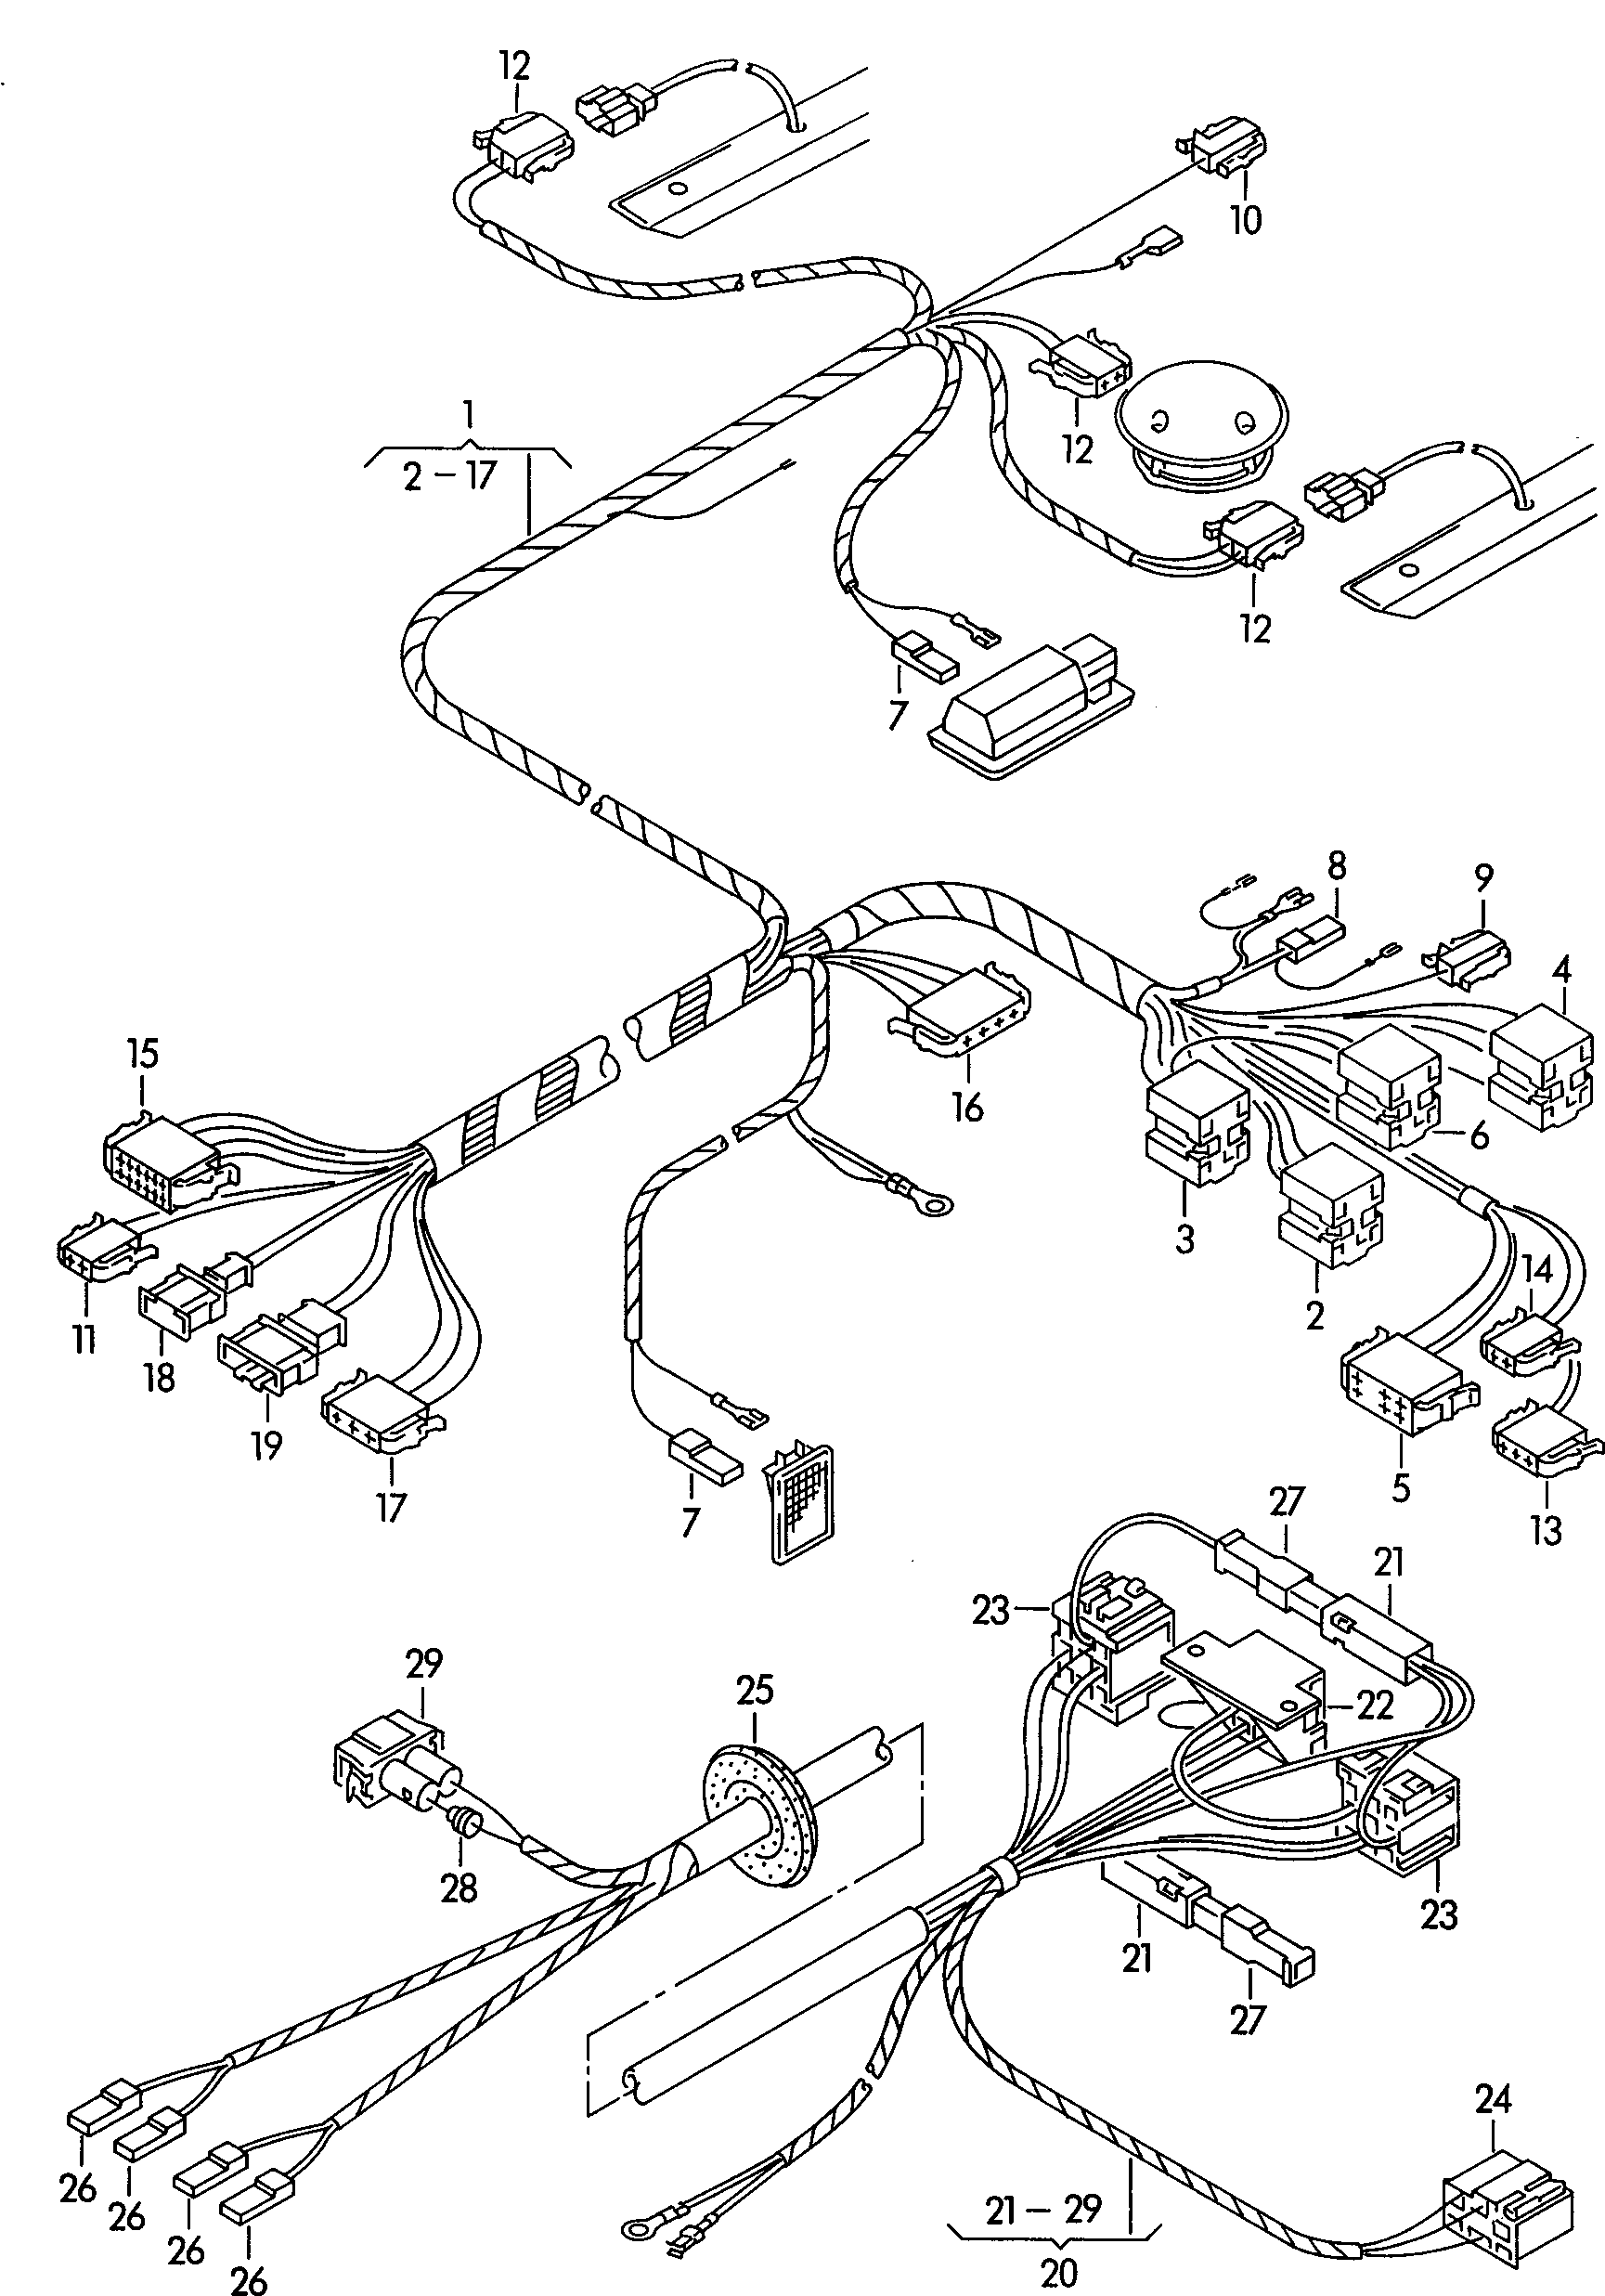 wiring harness for stretcher  - Transporter - tr